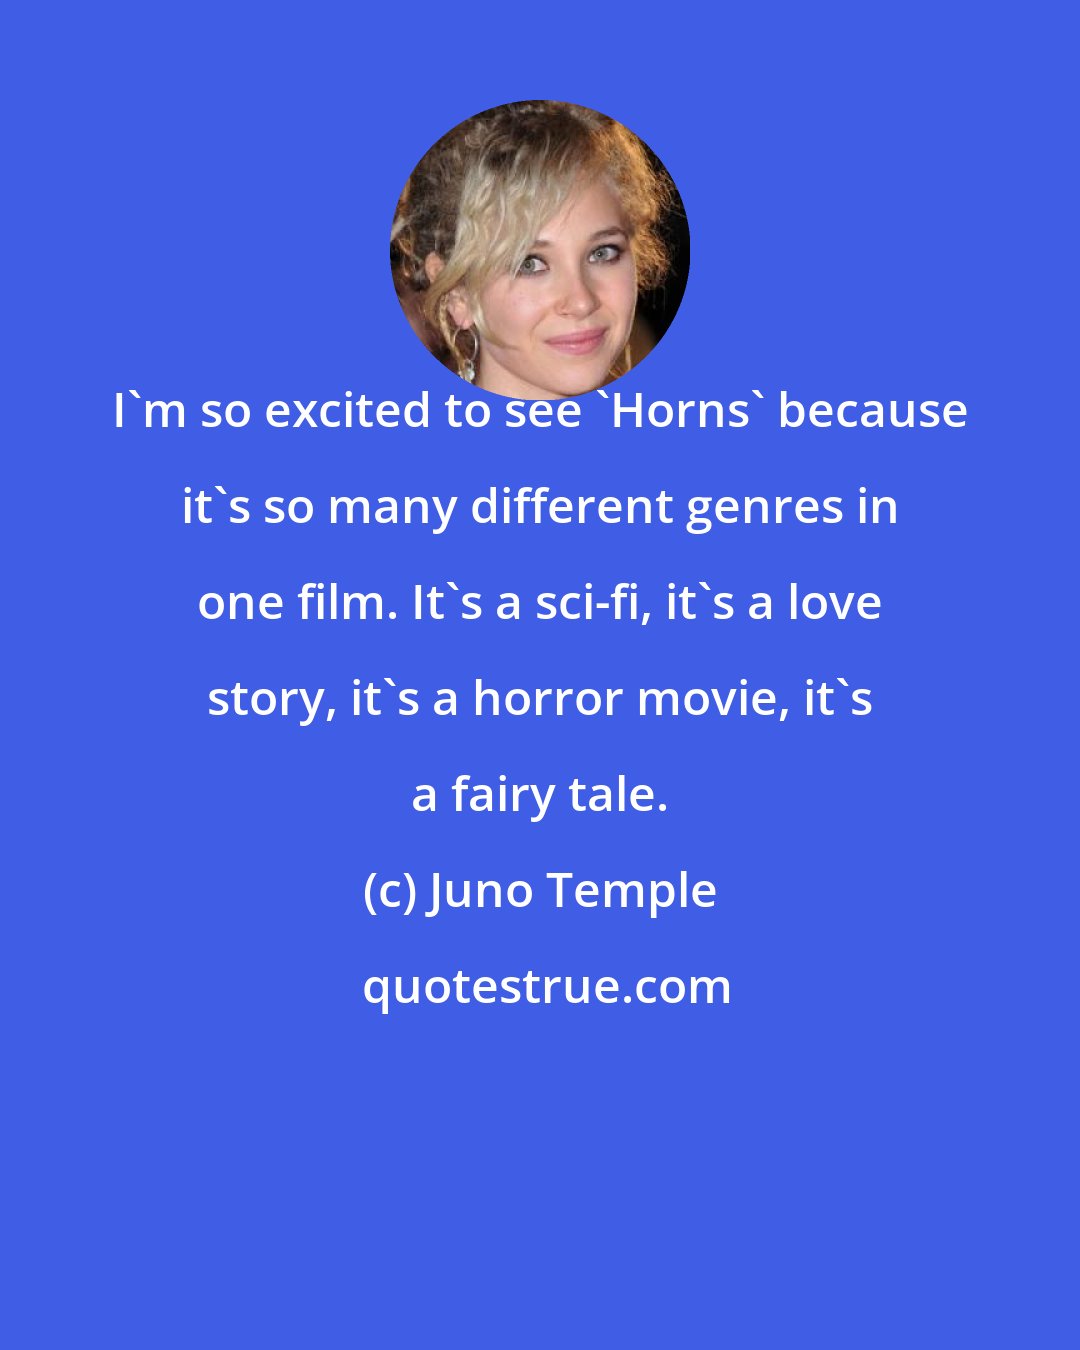 Juno Temple: I'm so excited to see 'Horns' because it's so many different genres in one film. It's a sci-fi, it's a love story, it's a horror movie, it's a fairy tale.